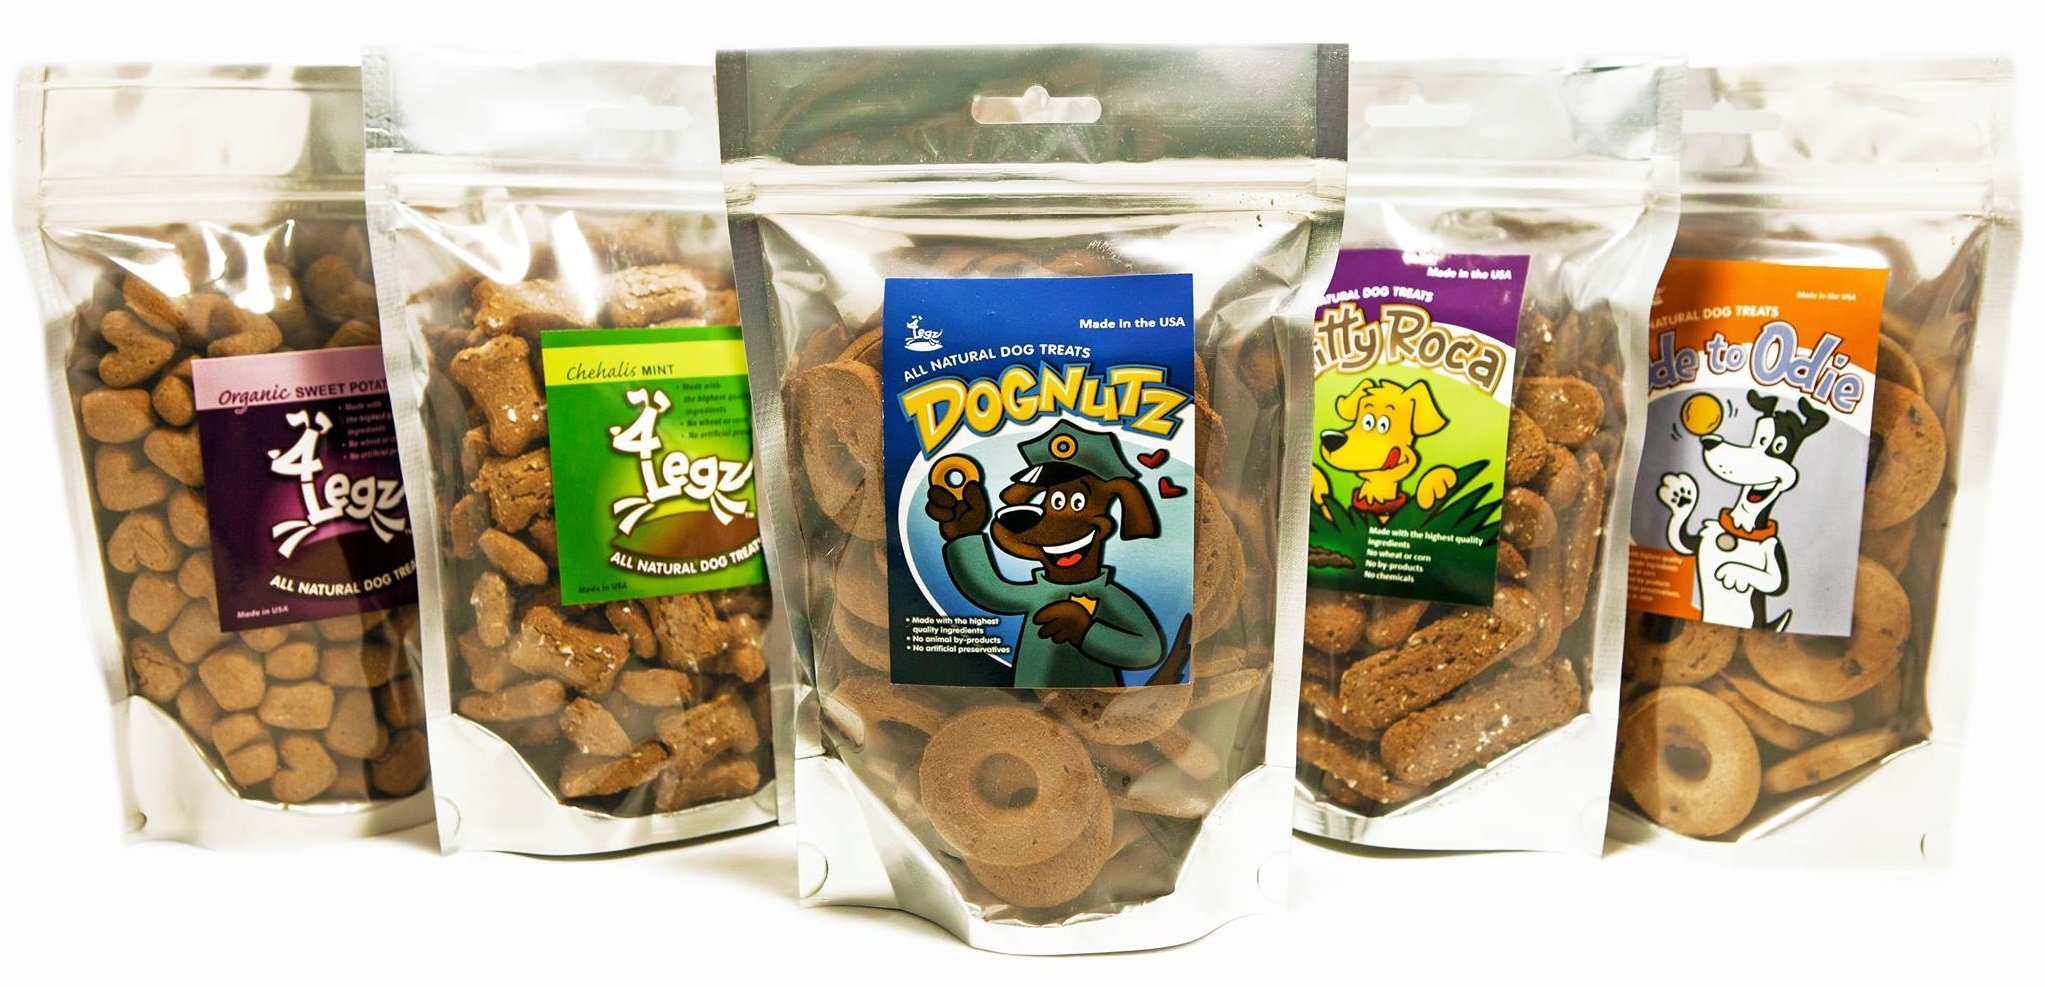 4Legz Dog Treats are made of Ingredients you can pronounce